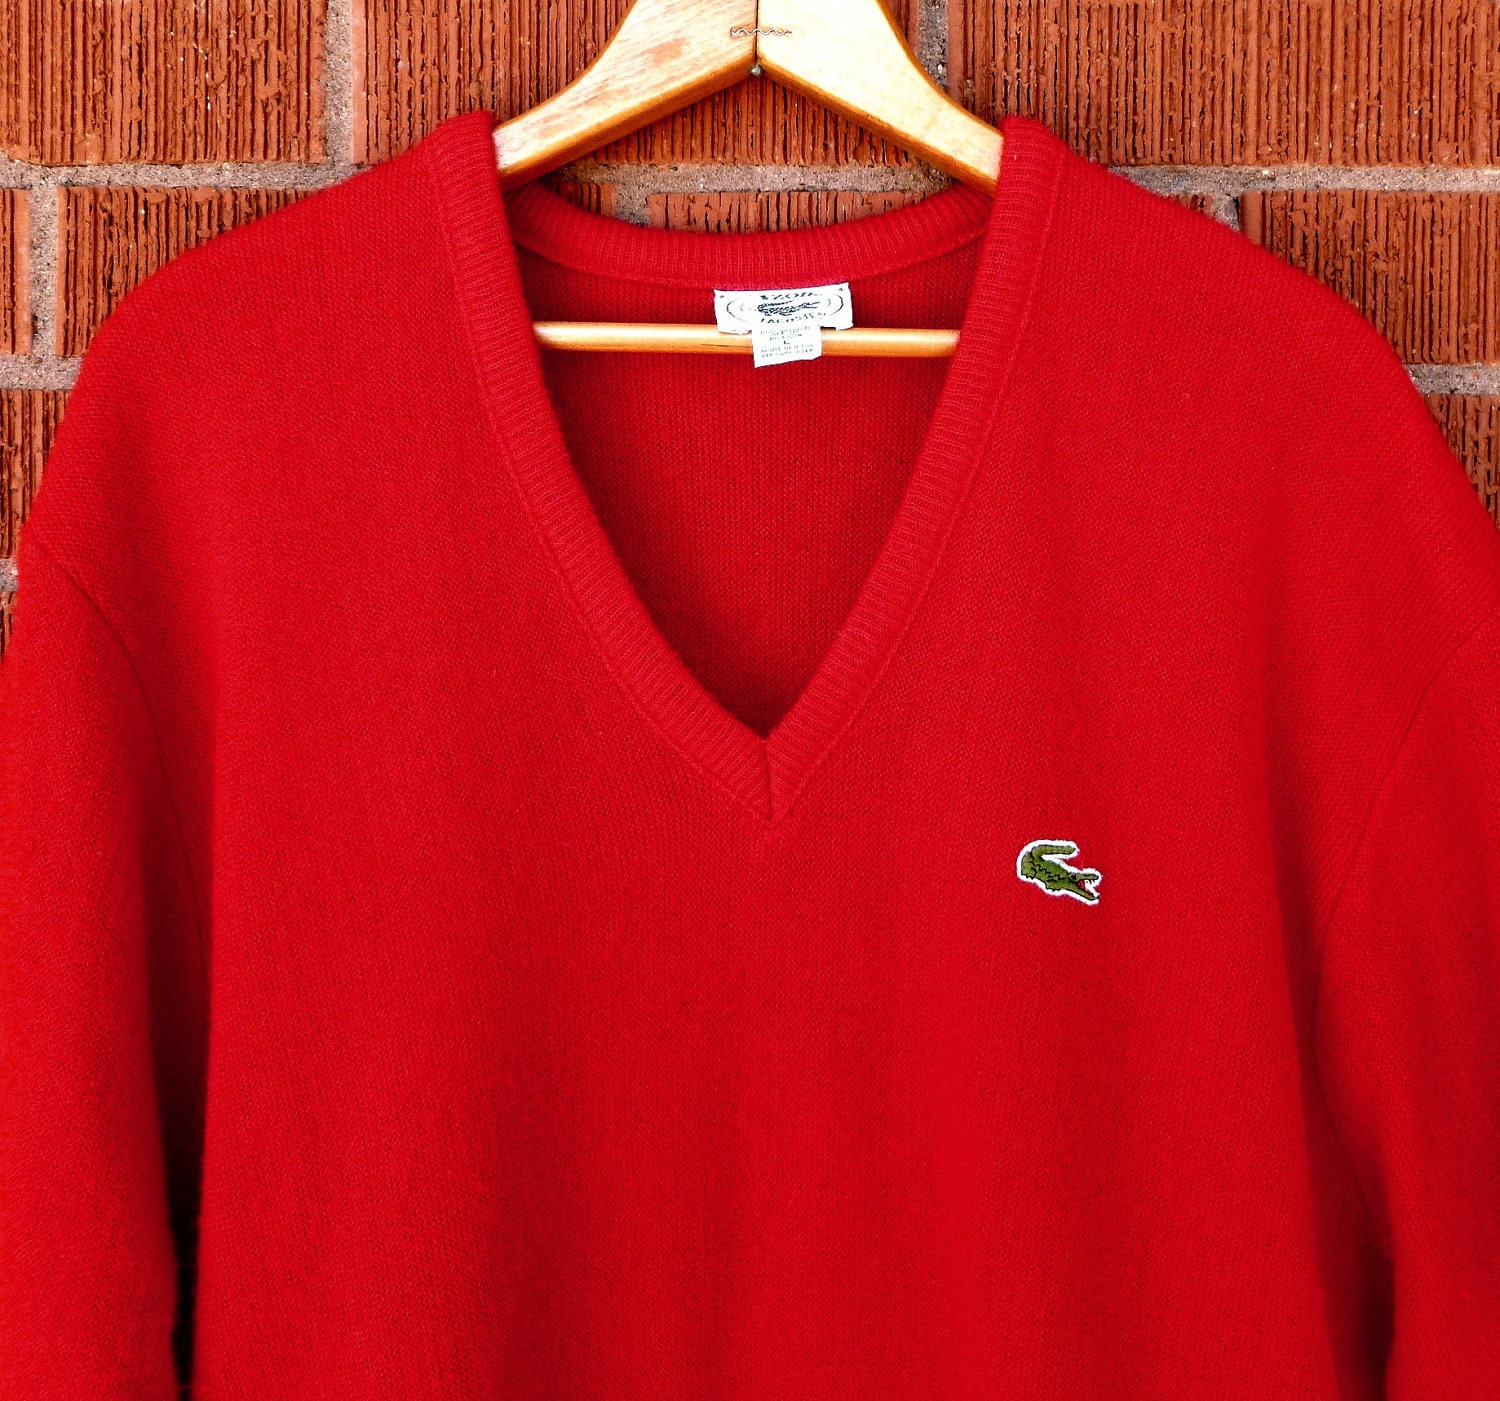 Mens Vintage 1980s Lacoste Sweater Red Large